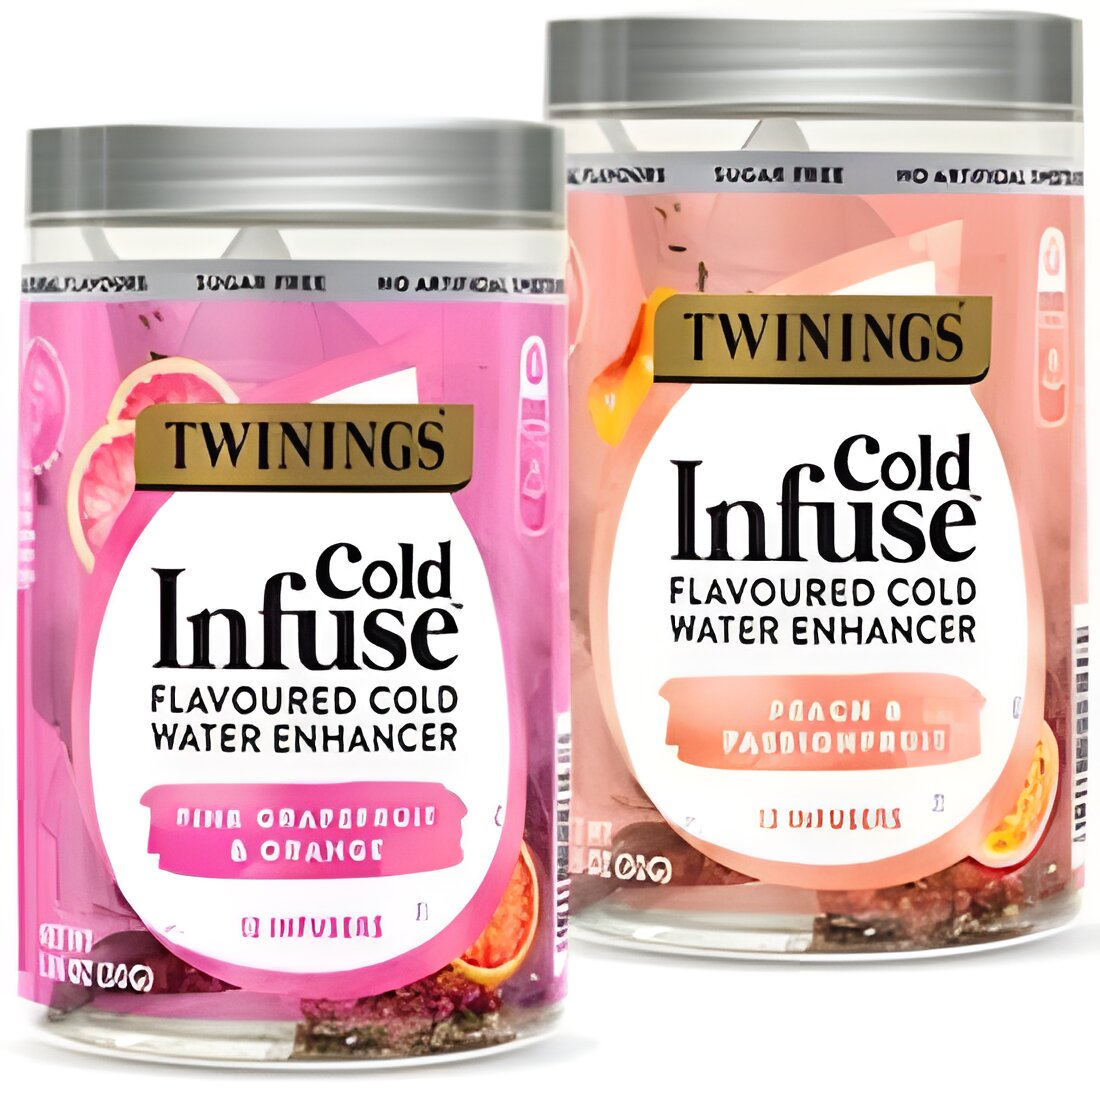 Free Twinings Cold Infuse Flavored Water Enhancer